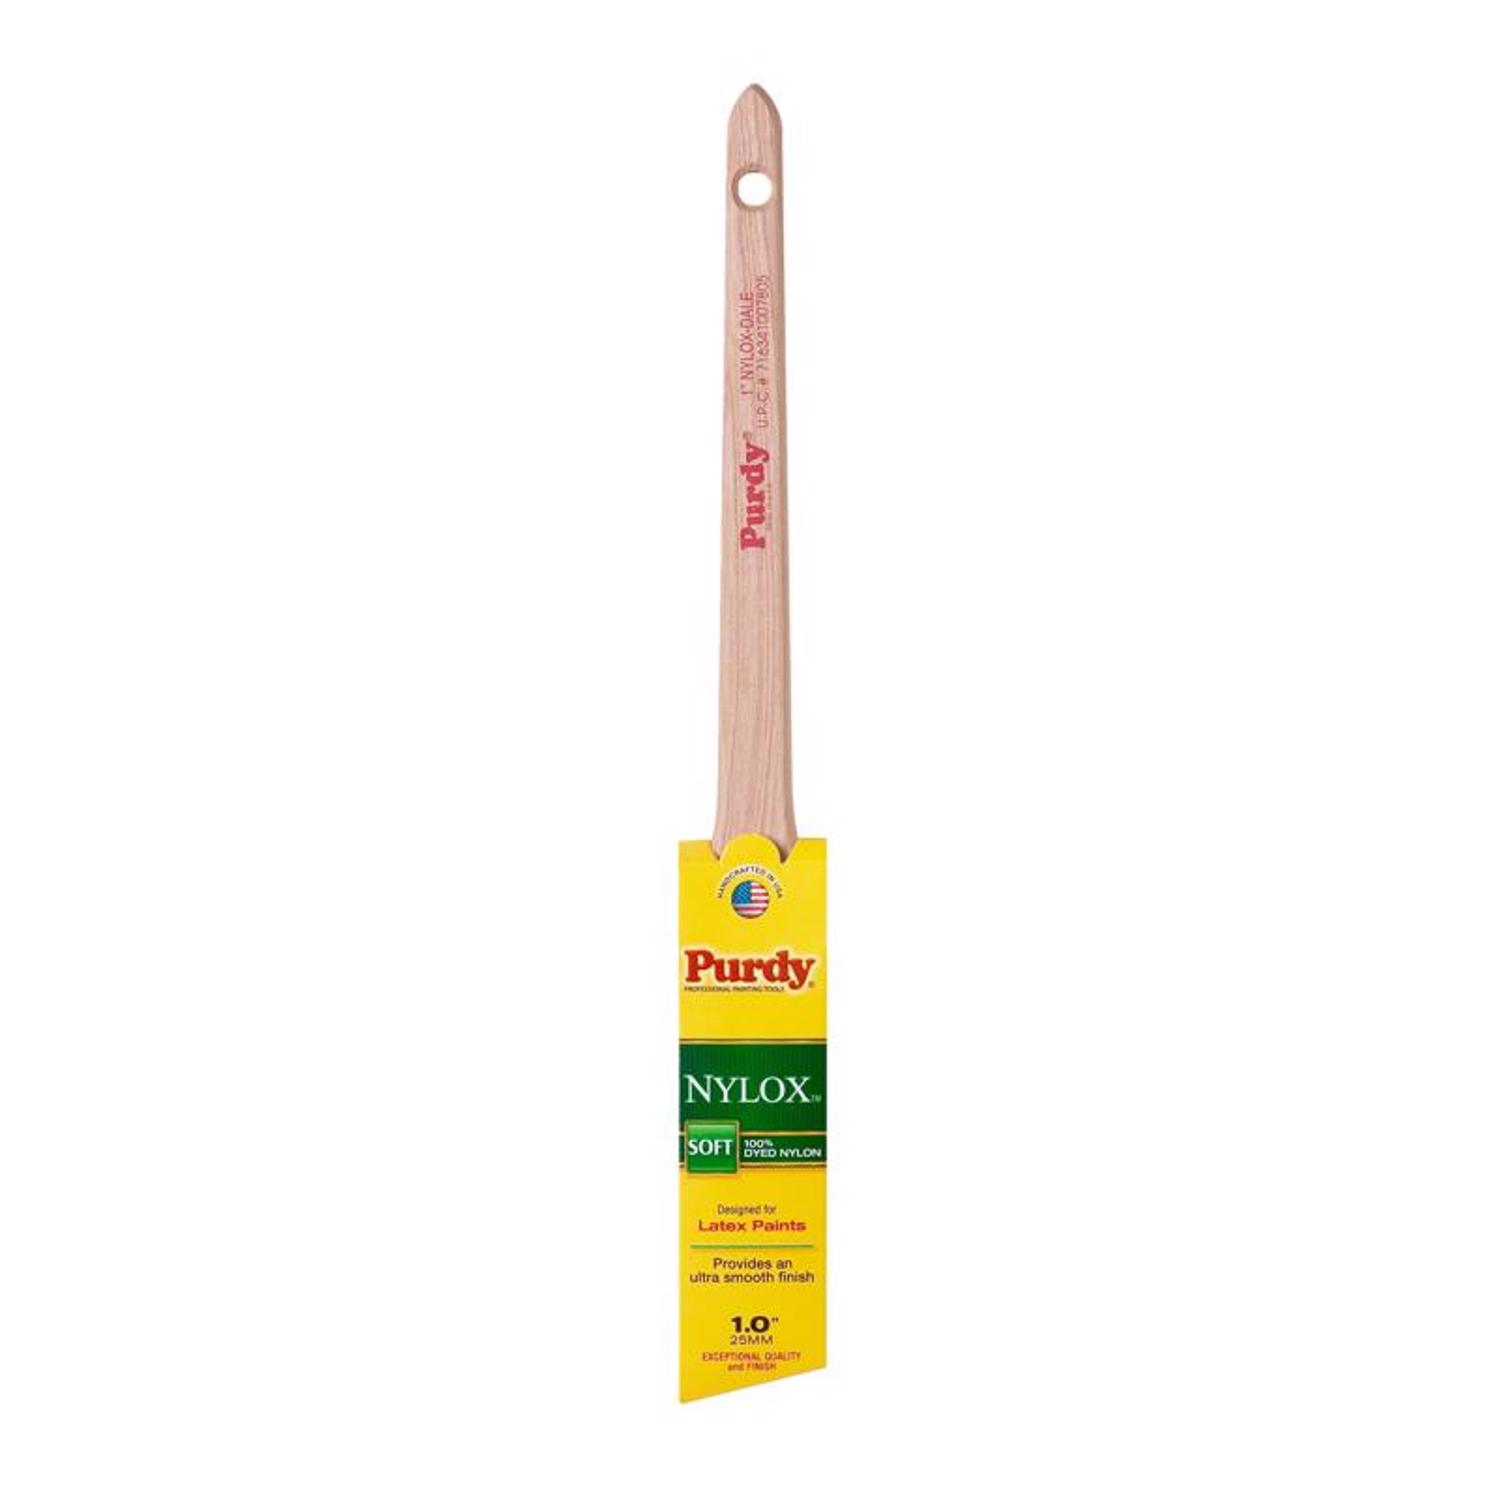 Photos - Putty Knife / Painting Tool Purdy Nylox Dale 1 in. Soft Angle Trim Paint Brush 144080210